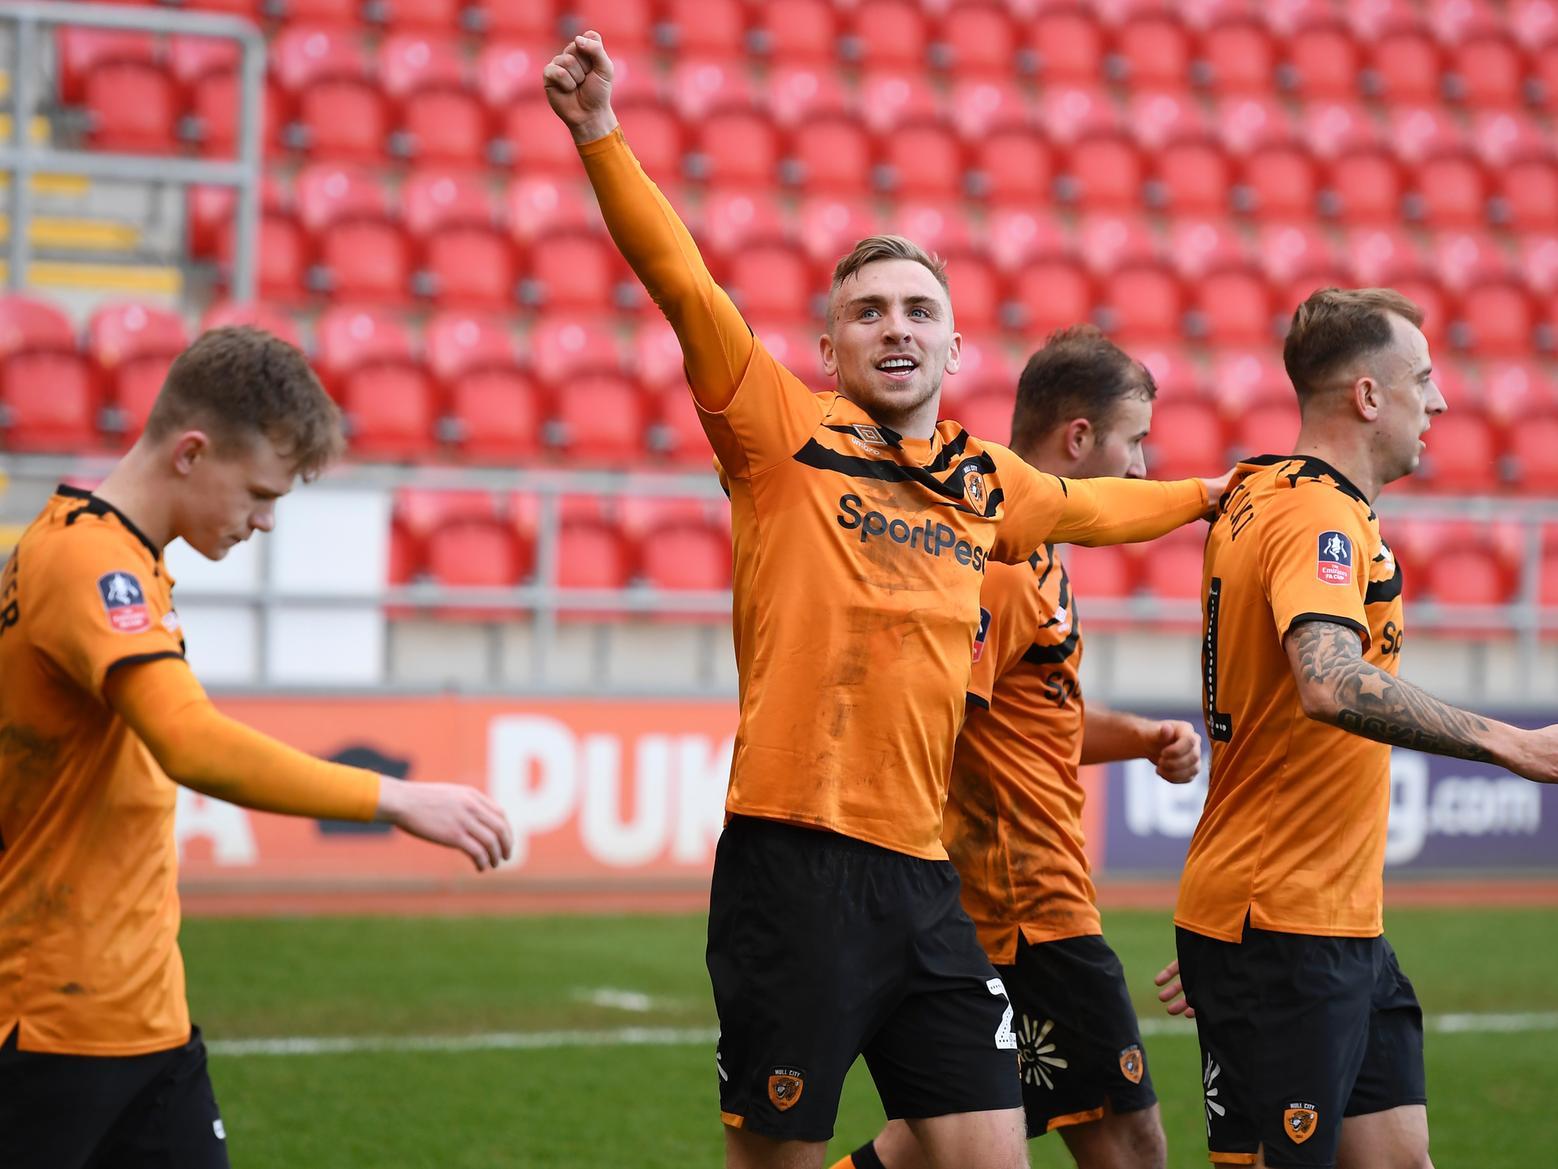 Newcastle United's chances of signing 15m rated Hull City striker Jarrod Bowen have increased. Peter Chapman - Steve Bruce's long-time associate - is reportedly set to represent the player during transfer talks. (Daily Mail)